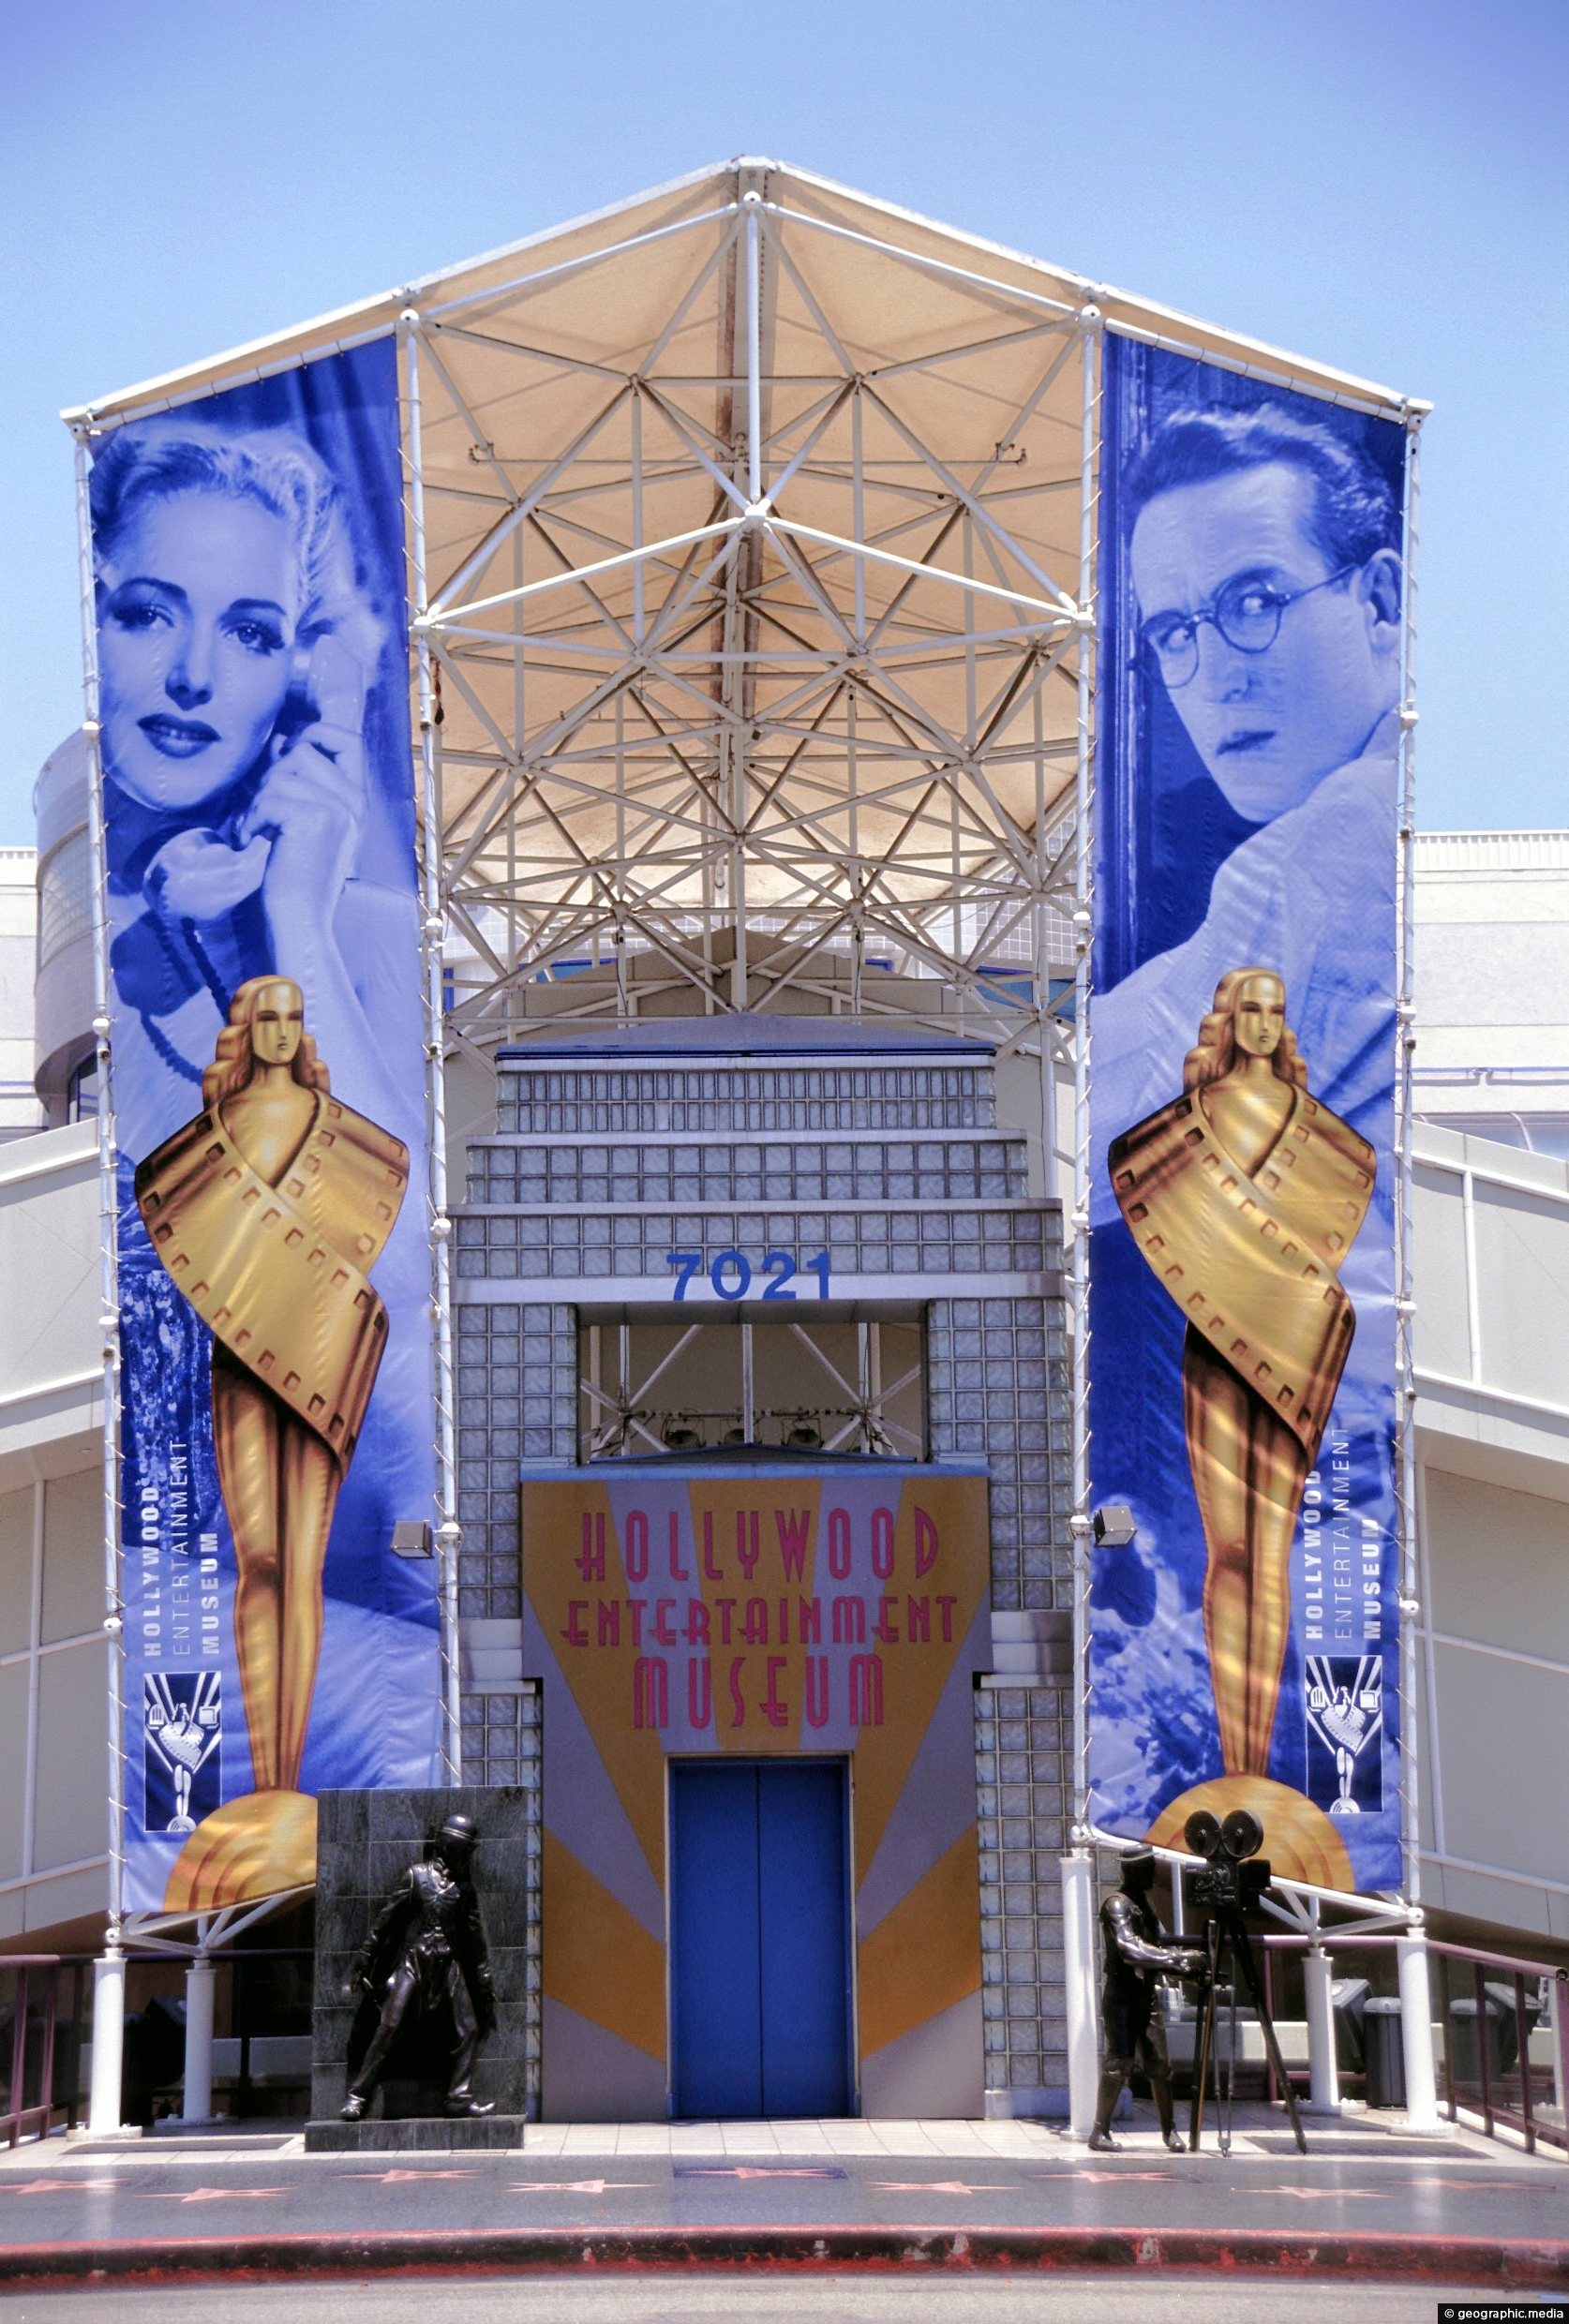 Hollywood Entertainment Museum